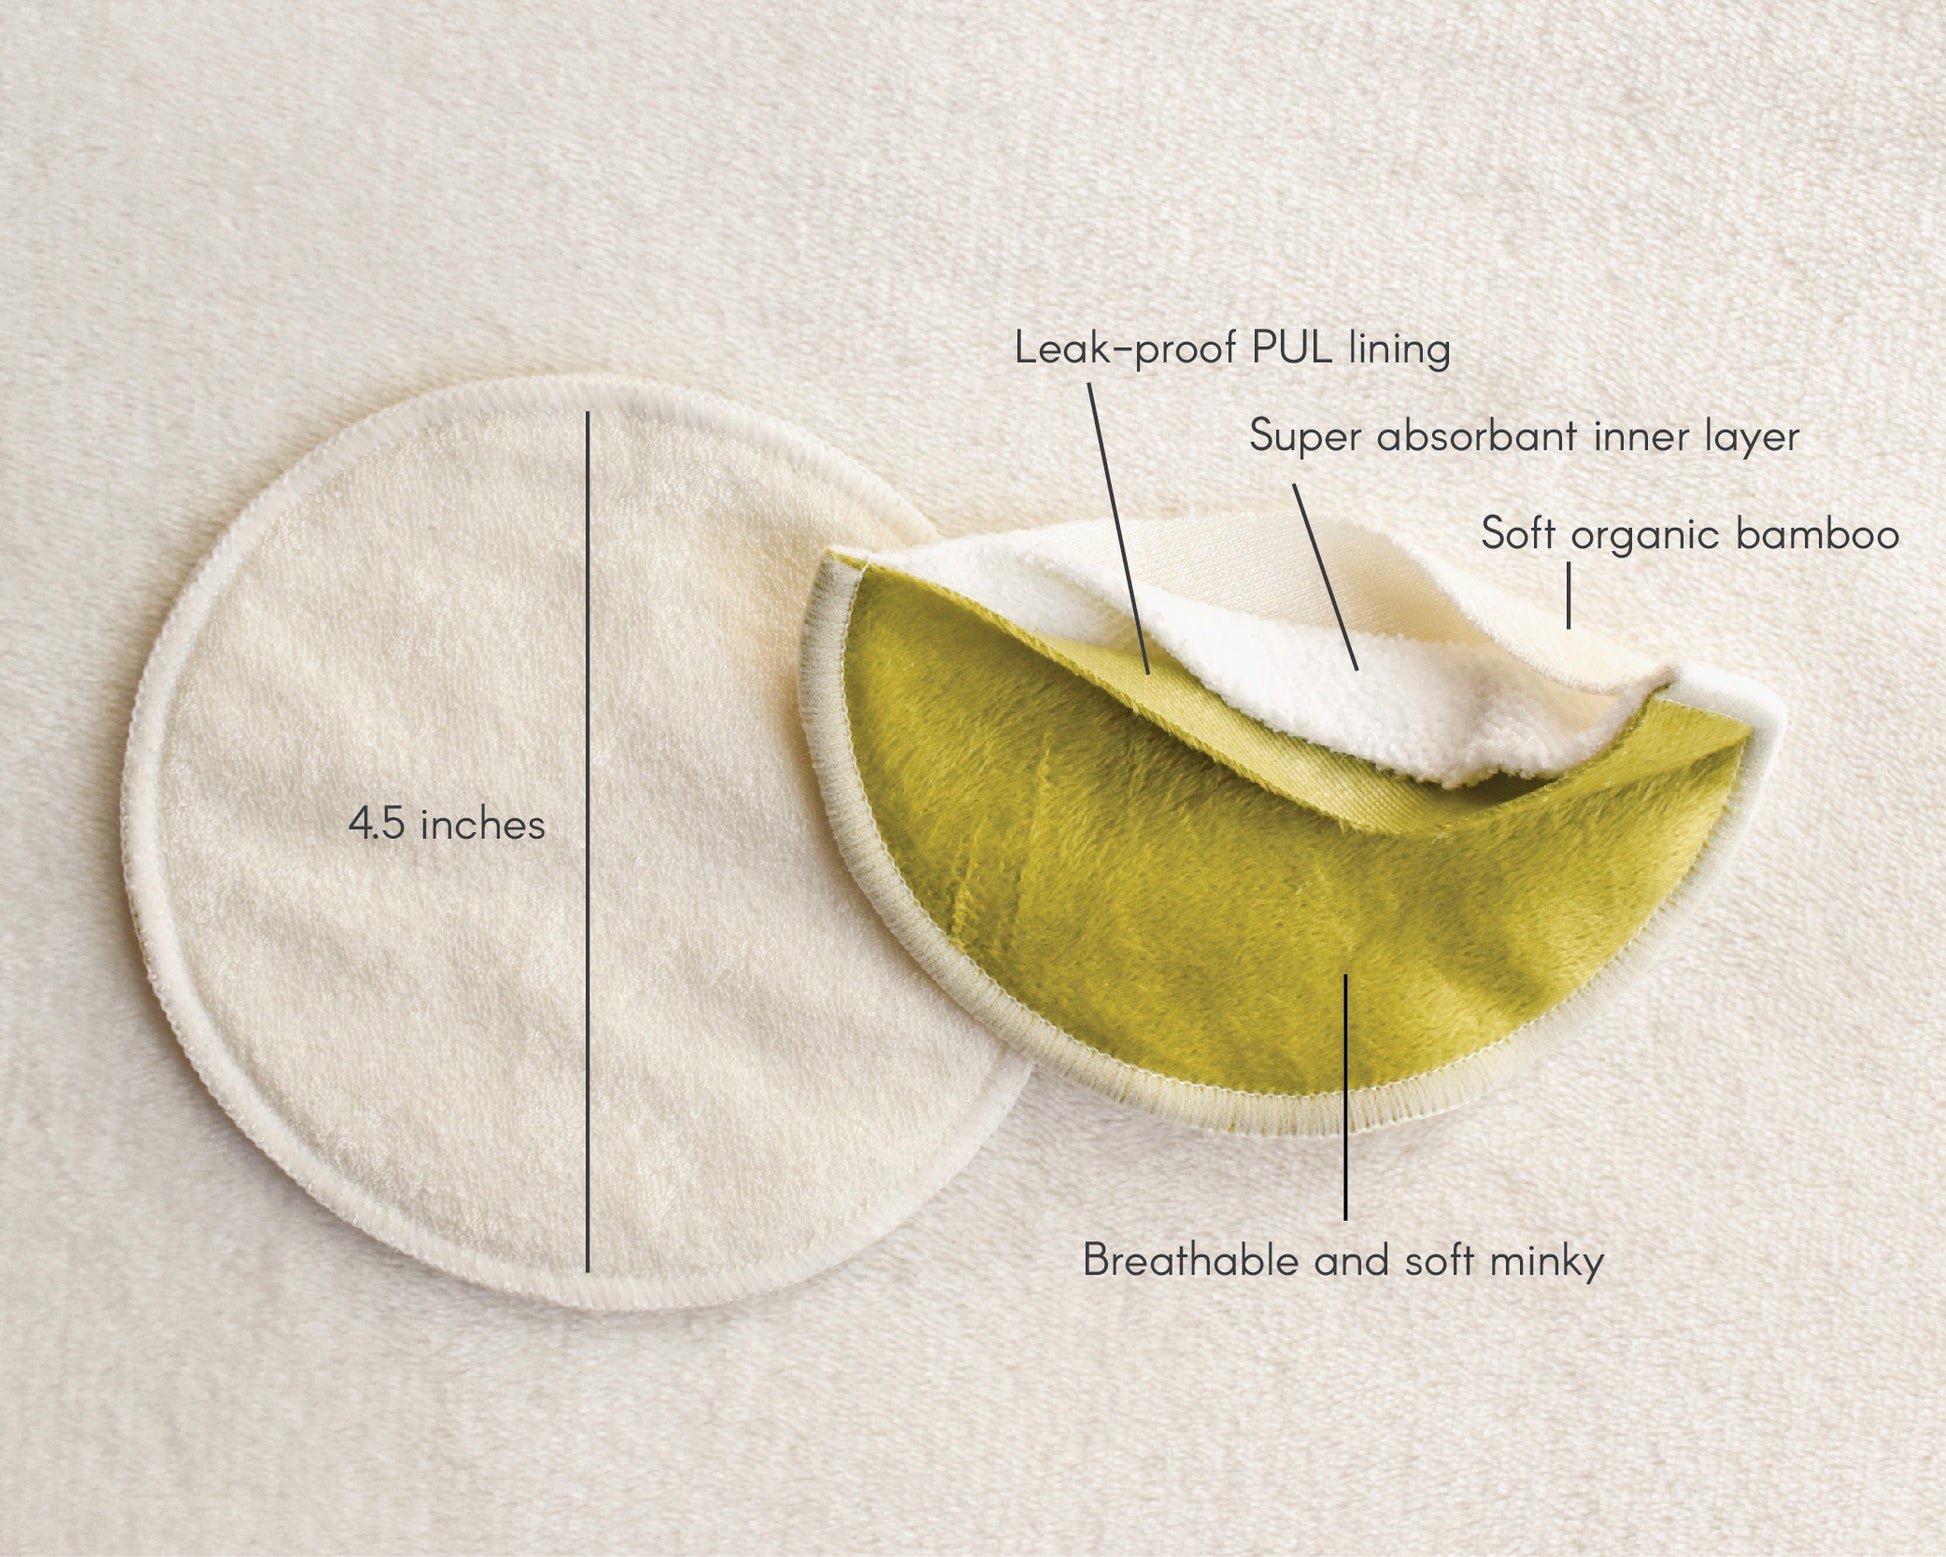 Reusable organic bamboo nursing pads from Fourth Trimester Mama featuring leak-proof PUL lining, super absorbent inner layer, soft organic bamboo, and breathable and soft minky